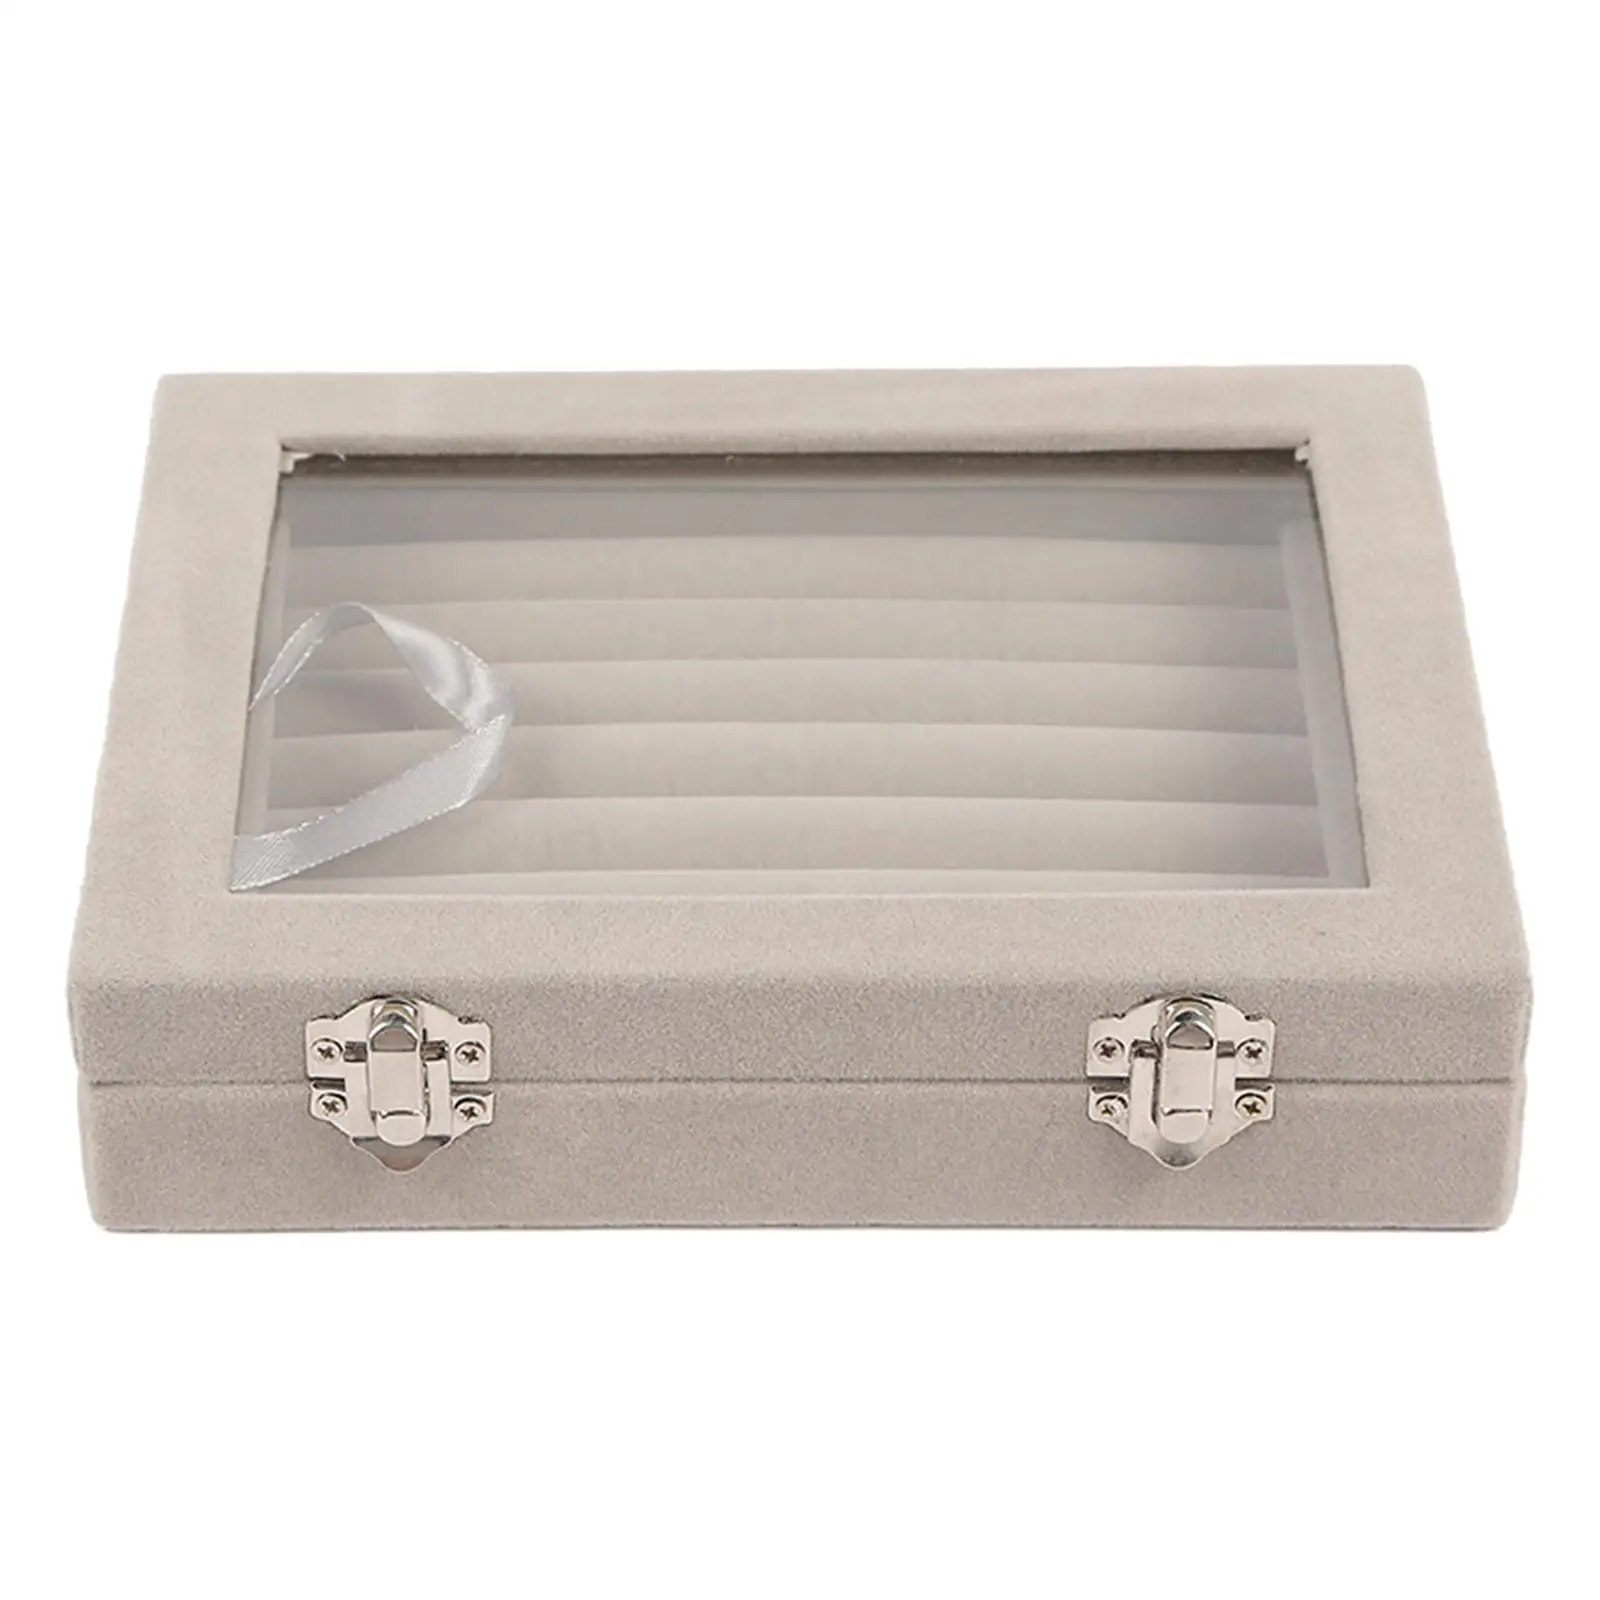 Rings Display Tray Gifts Stackable Portable Storage Box for Shelves Counter Store Display Jewelry Show for Rings Studs Earrings